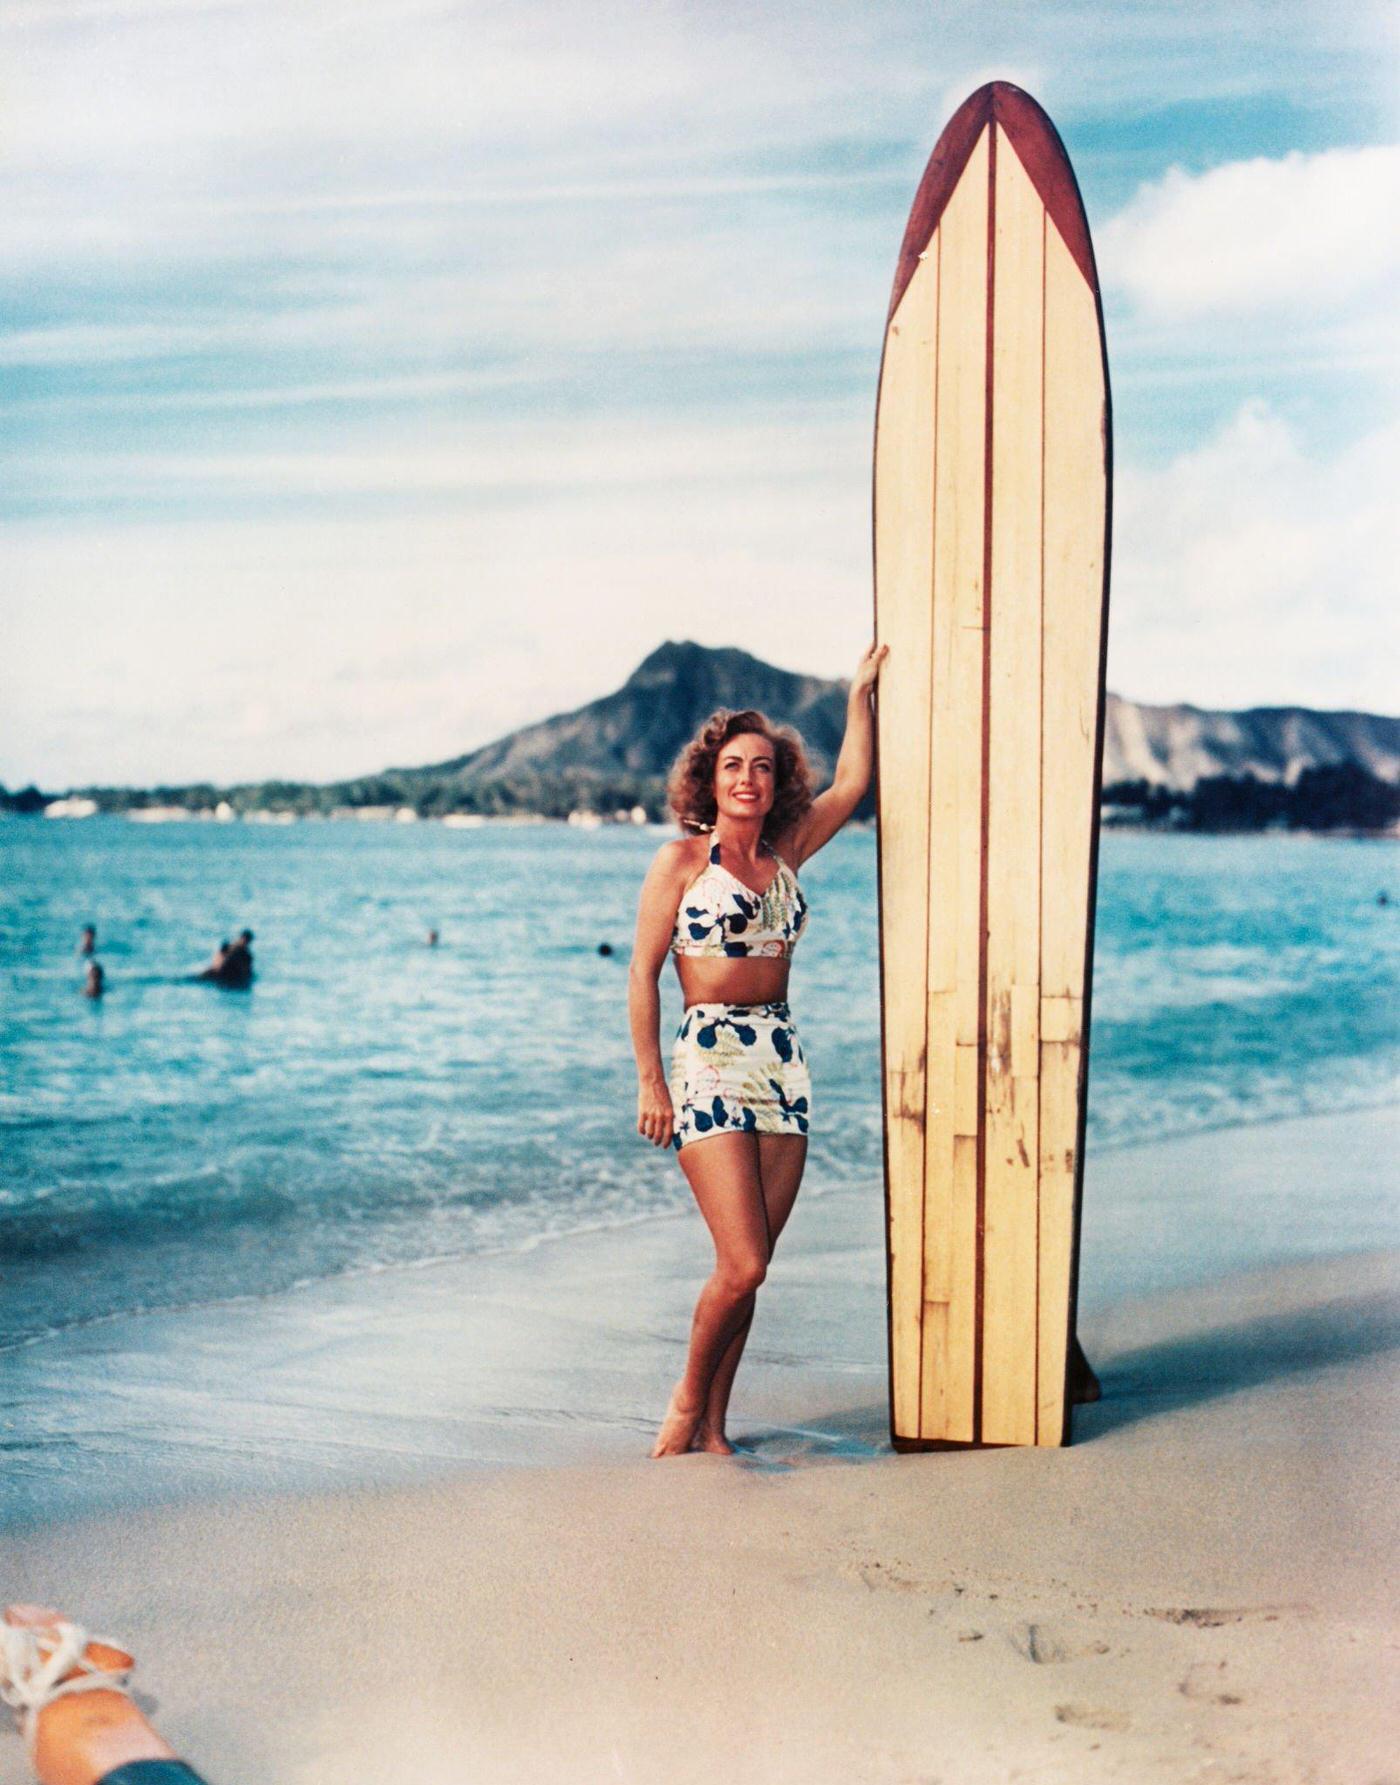 Joan Crawford holding a large surfboard